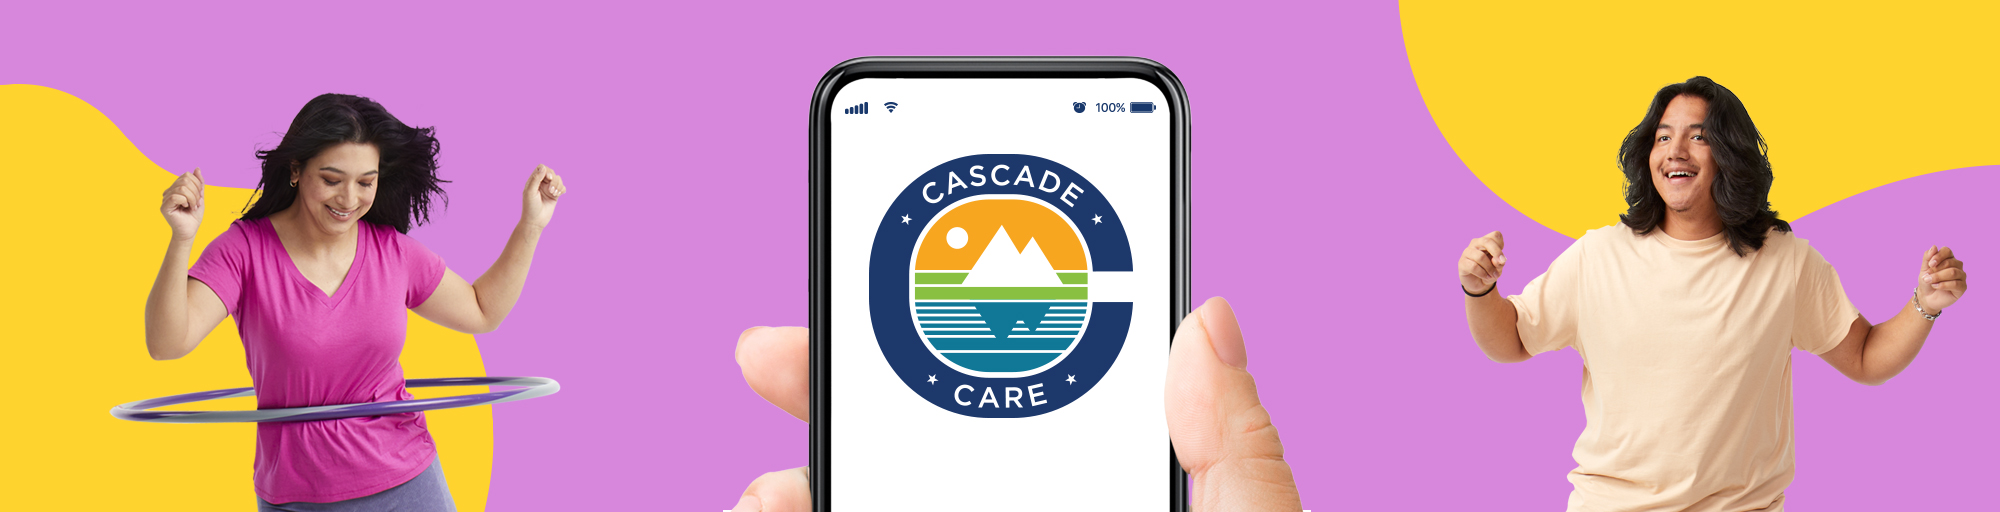 A woman hula hooping, a smart phone with the Cascade Care logo and a man dancing on a yellow and pink background.